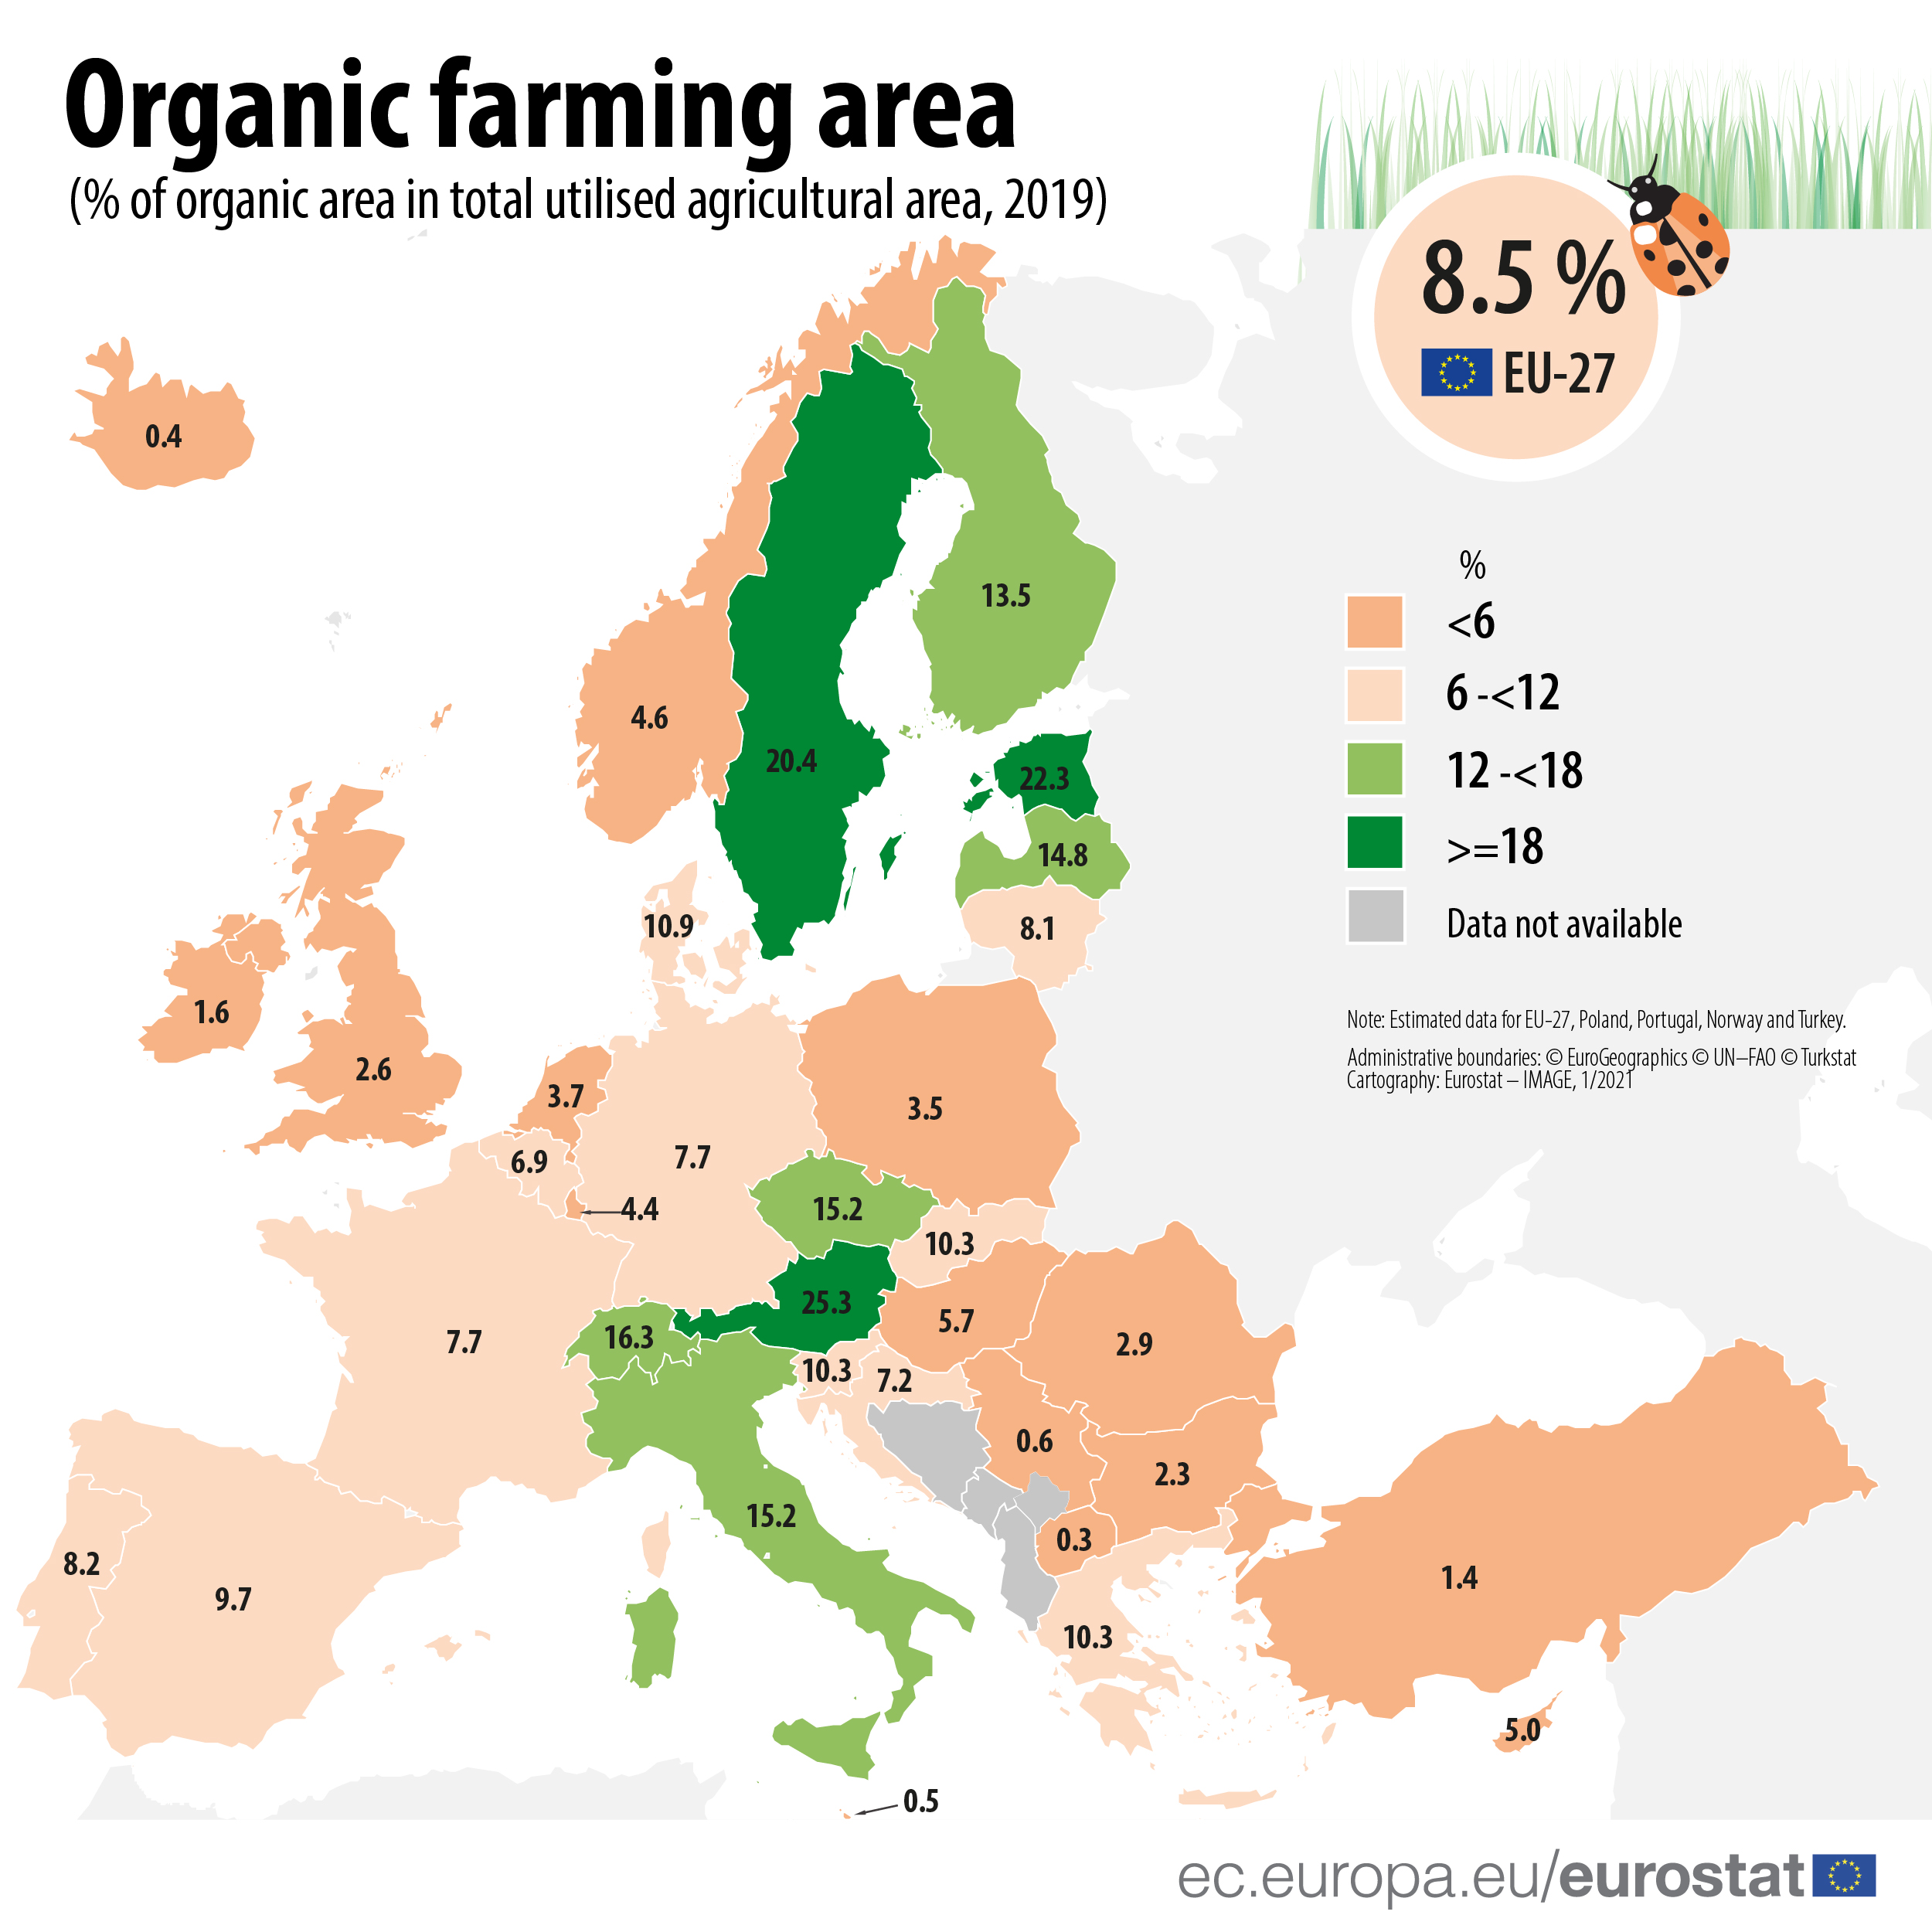 Map of organic farming area by EU country, 2019 data